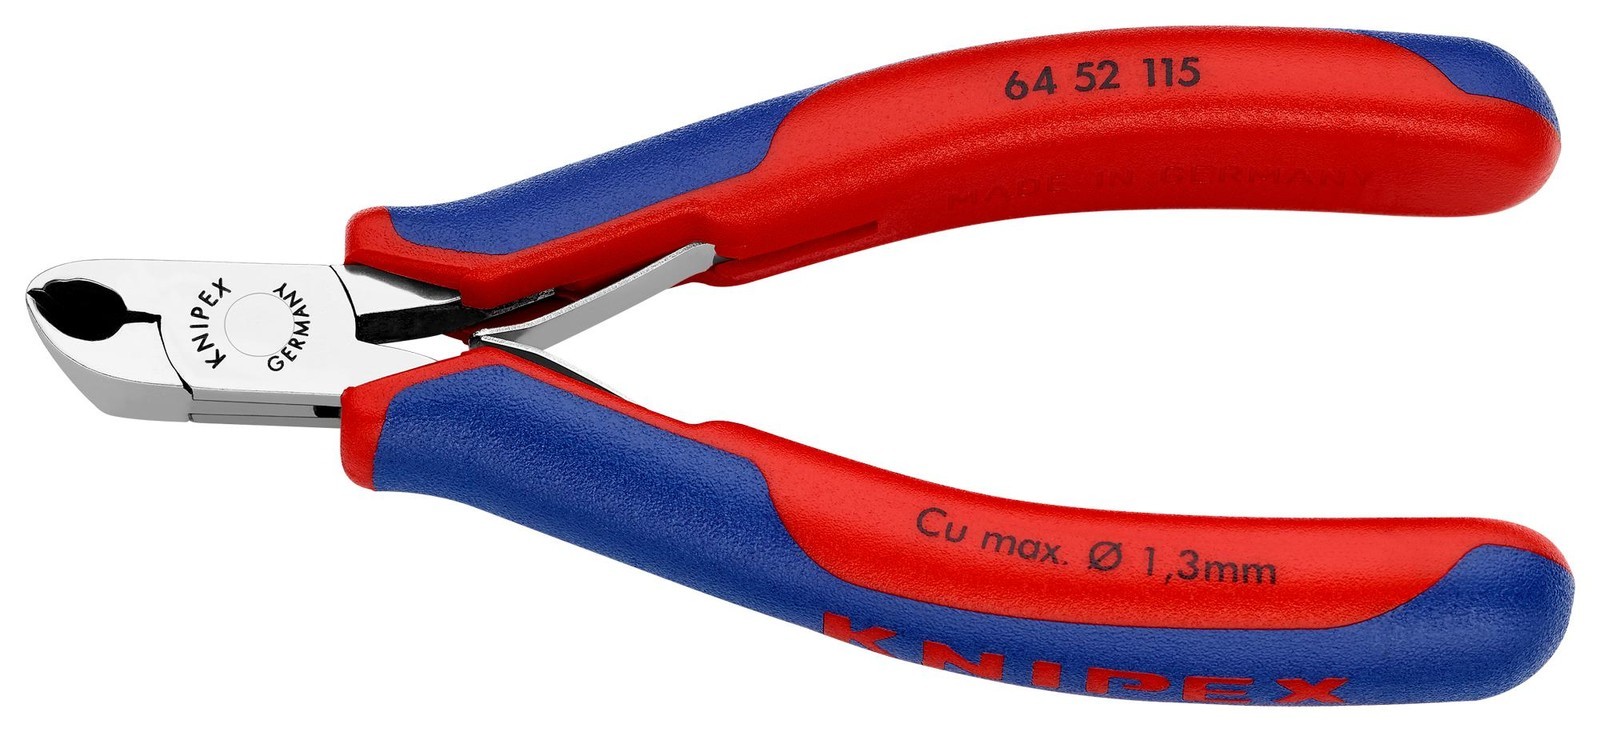 Knipex 64 52 115 Oblique Cutting NIppers